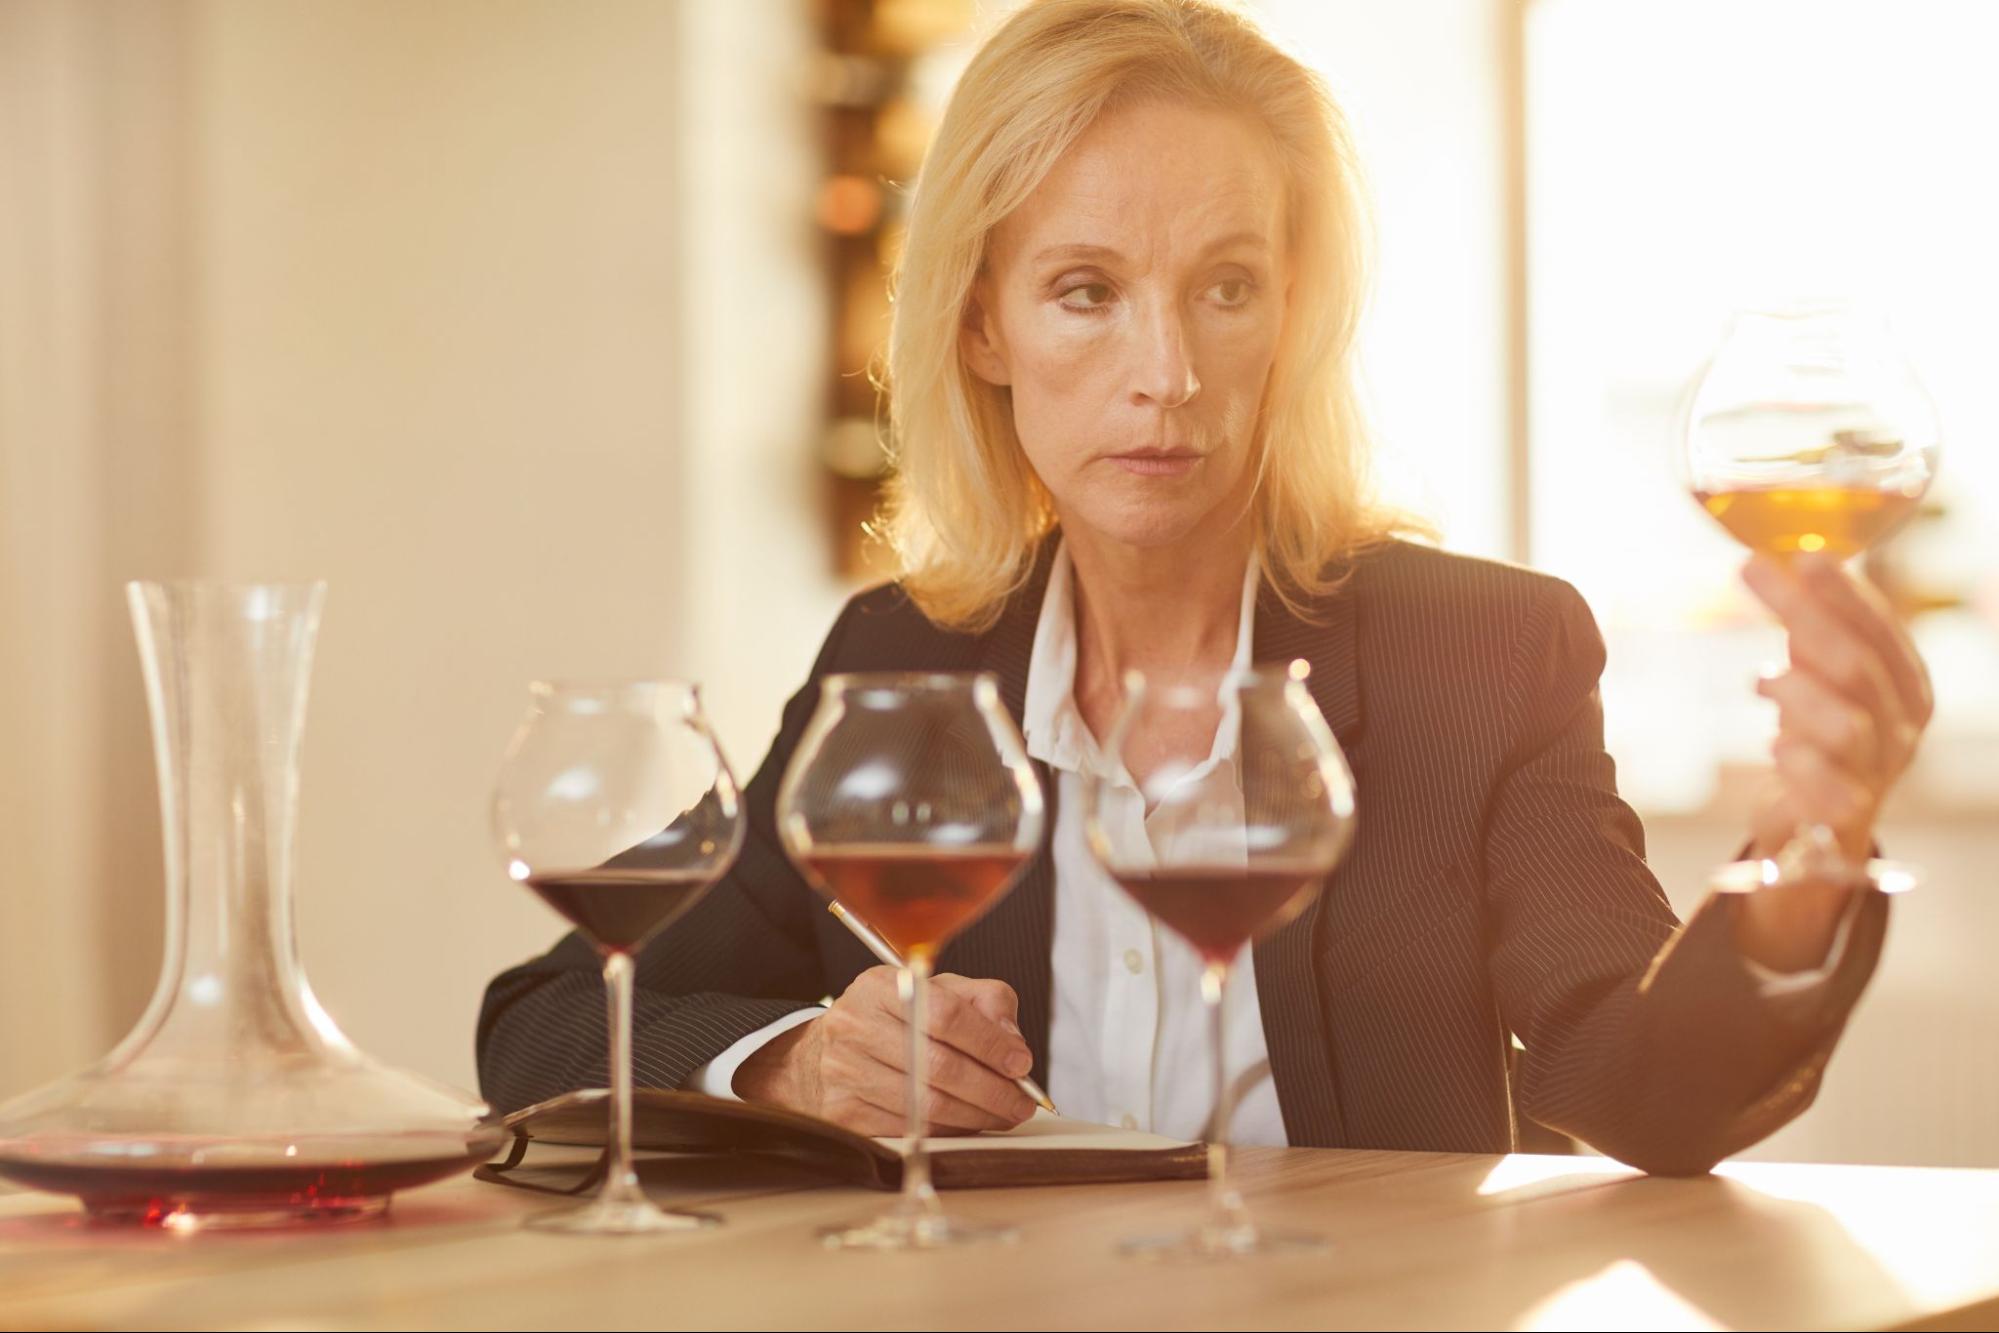 Earn certification to become a sommelier